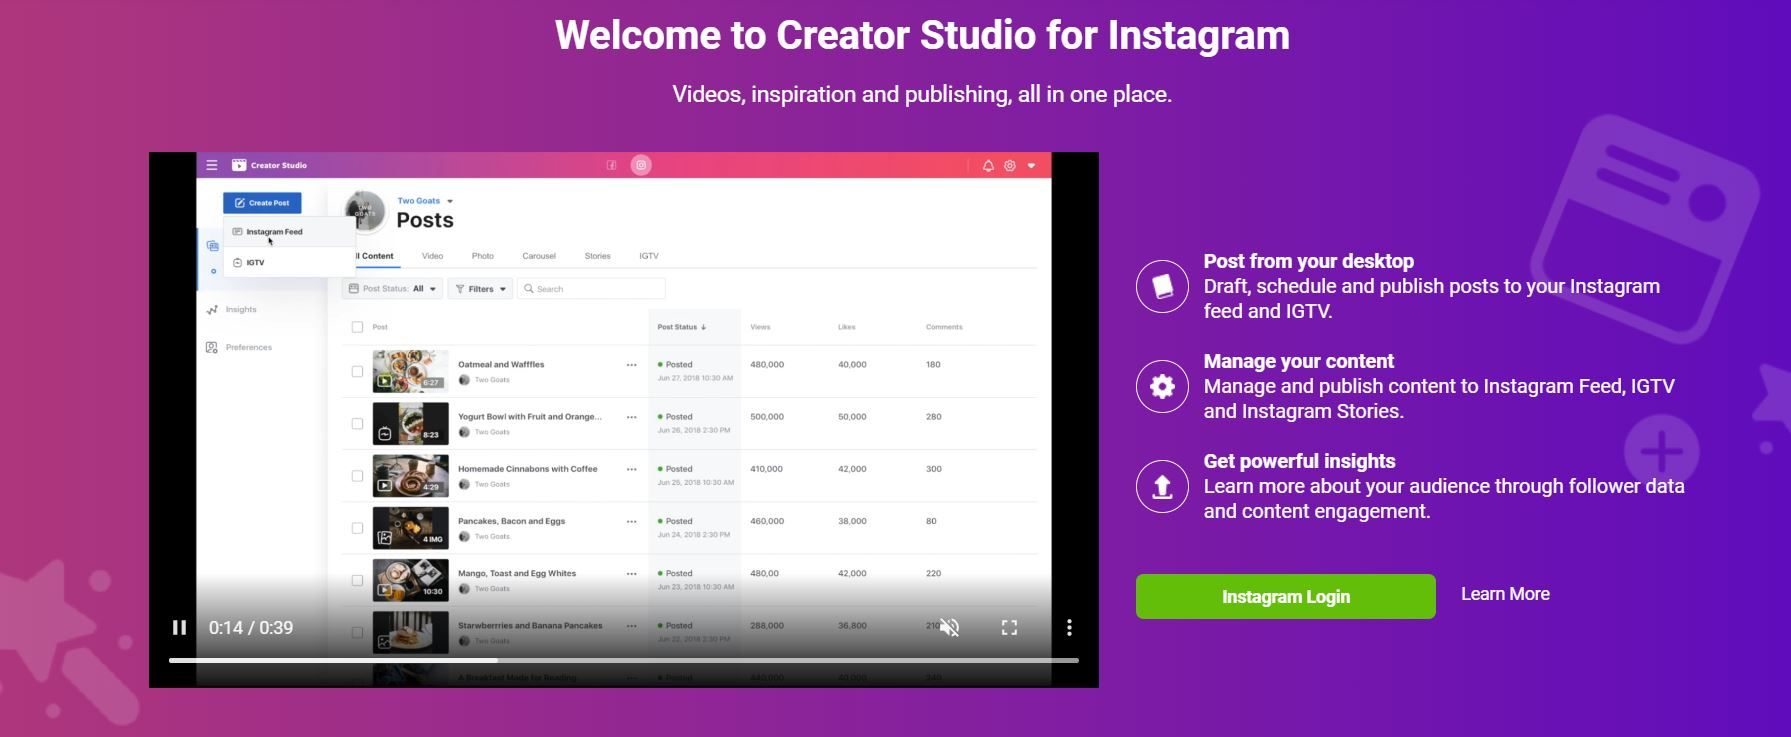 Creator Studio helps draft, schedule and publish posts to your Instagram feed